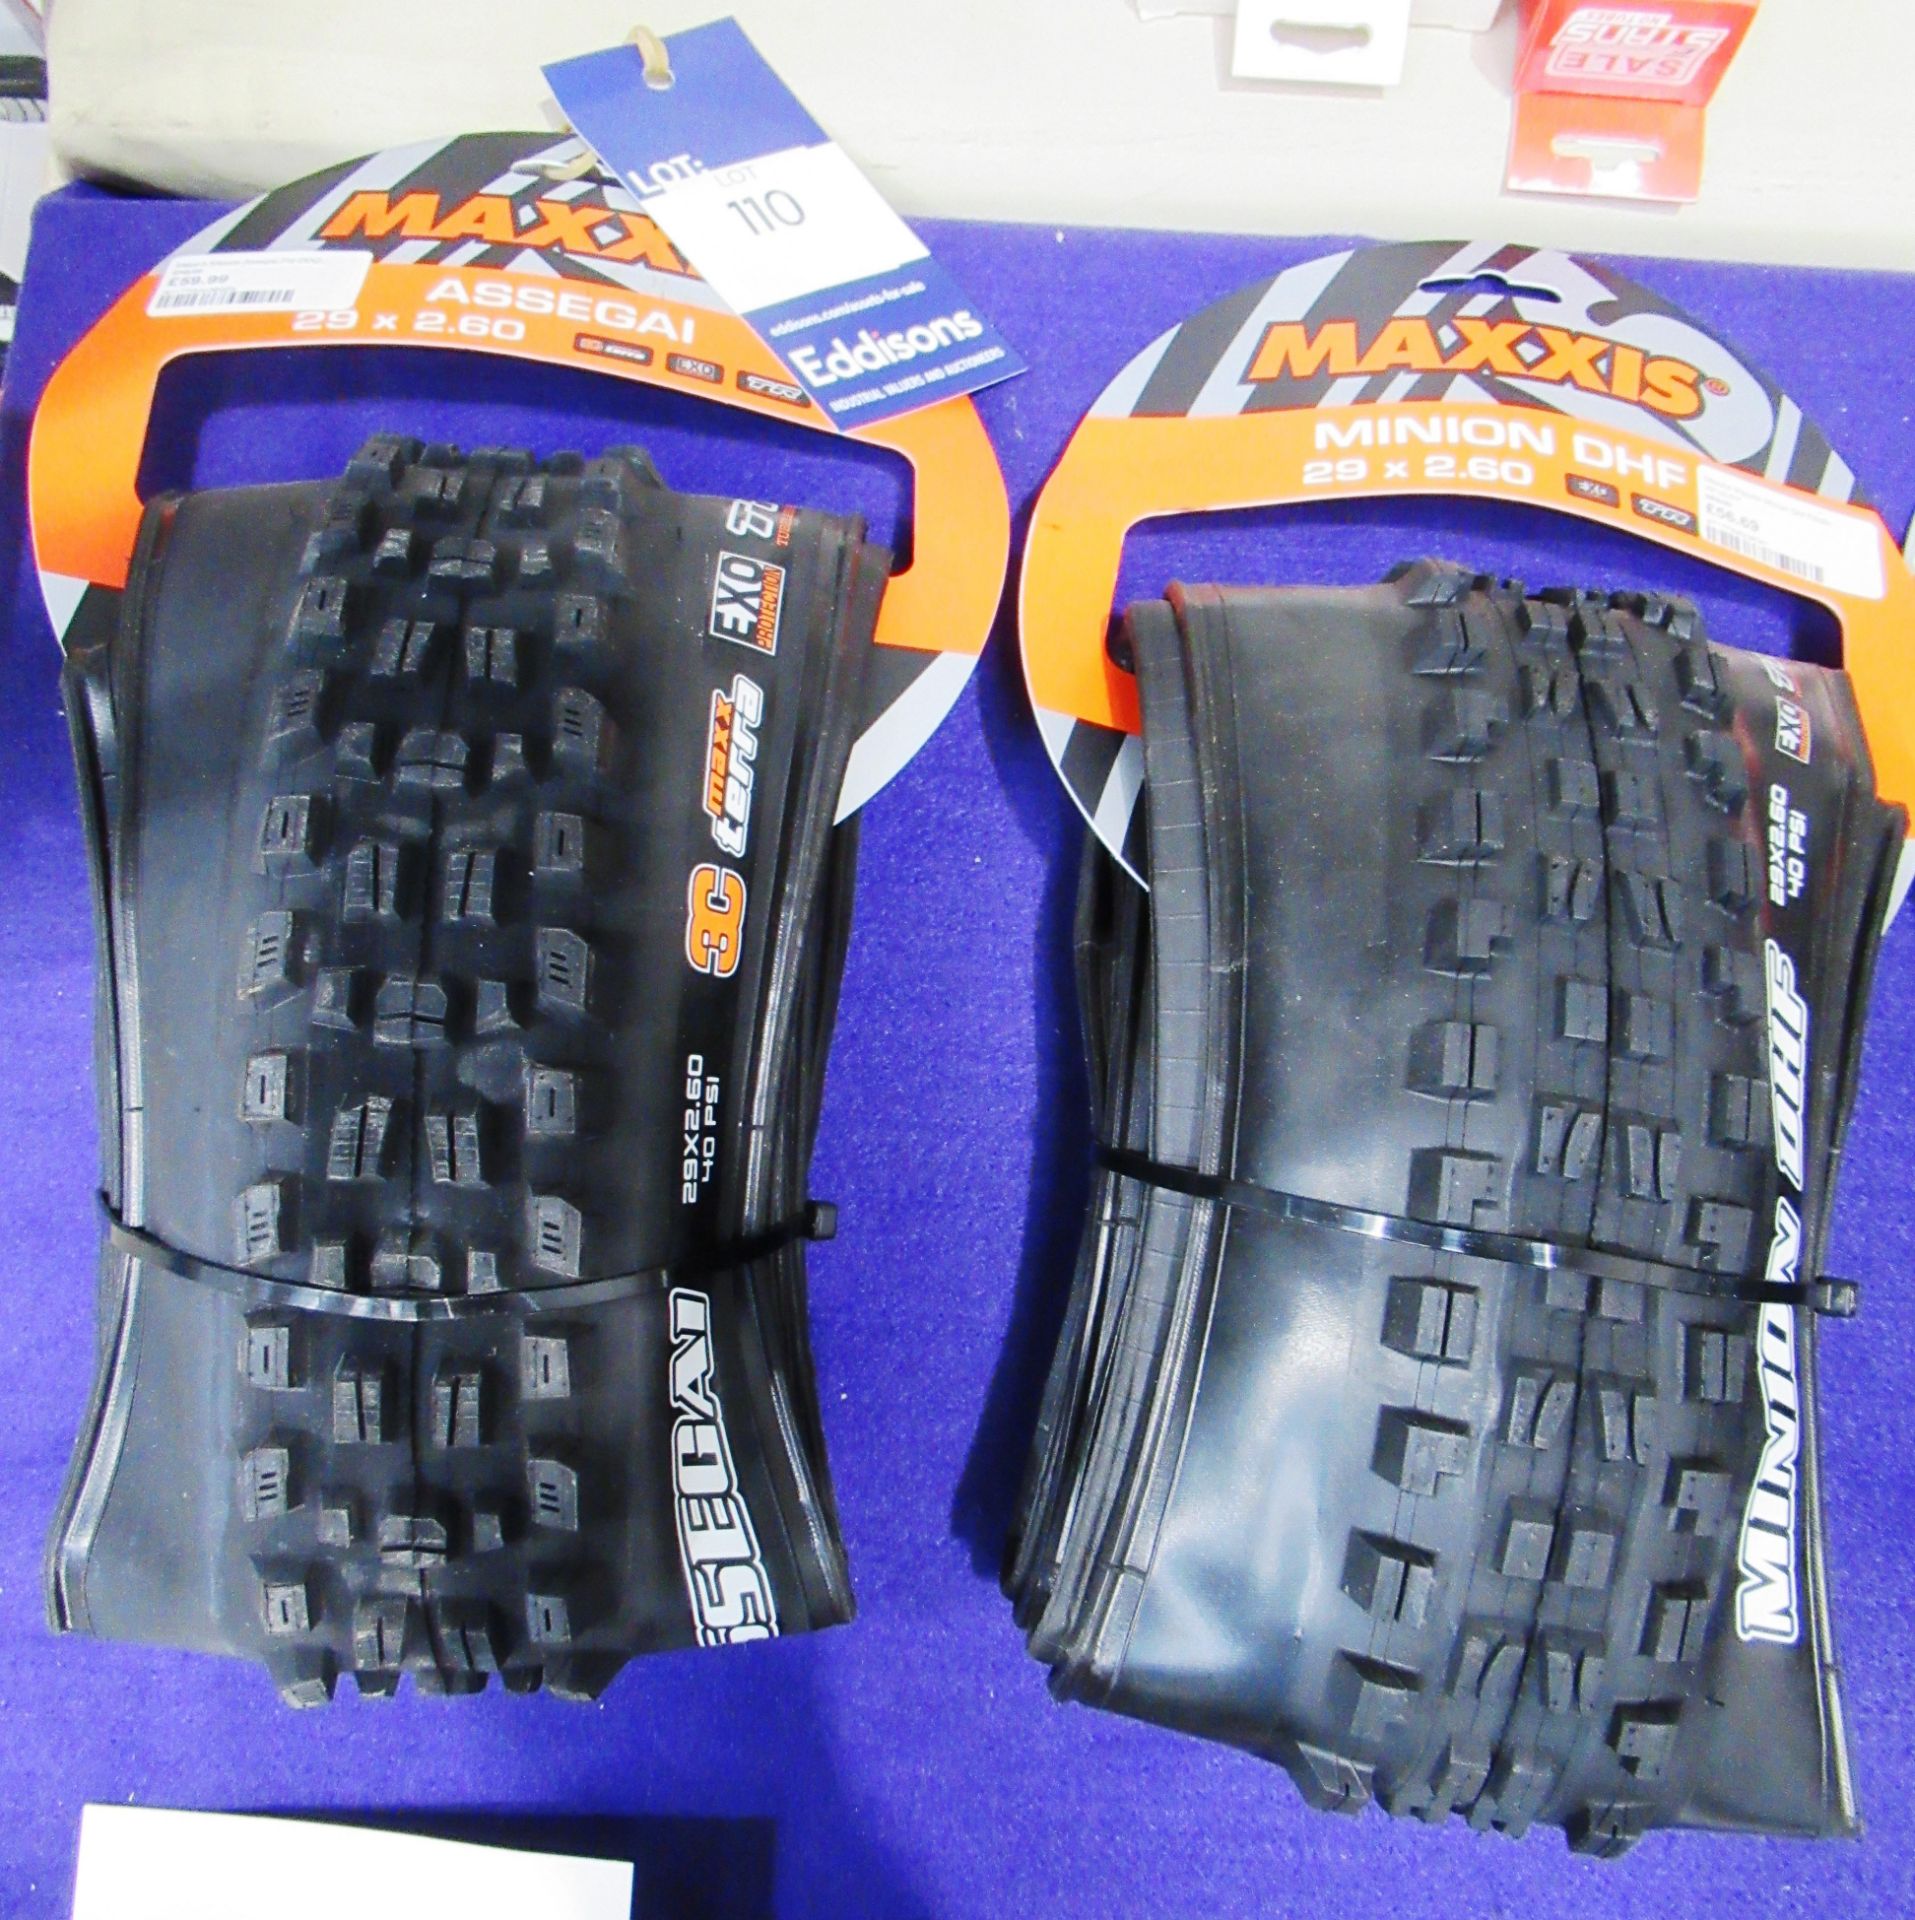 2x Maxxis Assegai DHF 29.0"x2.60" Bicycle Tyres. Total RRP £113.98